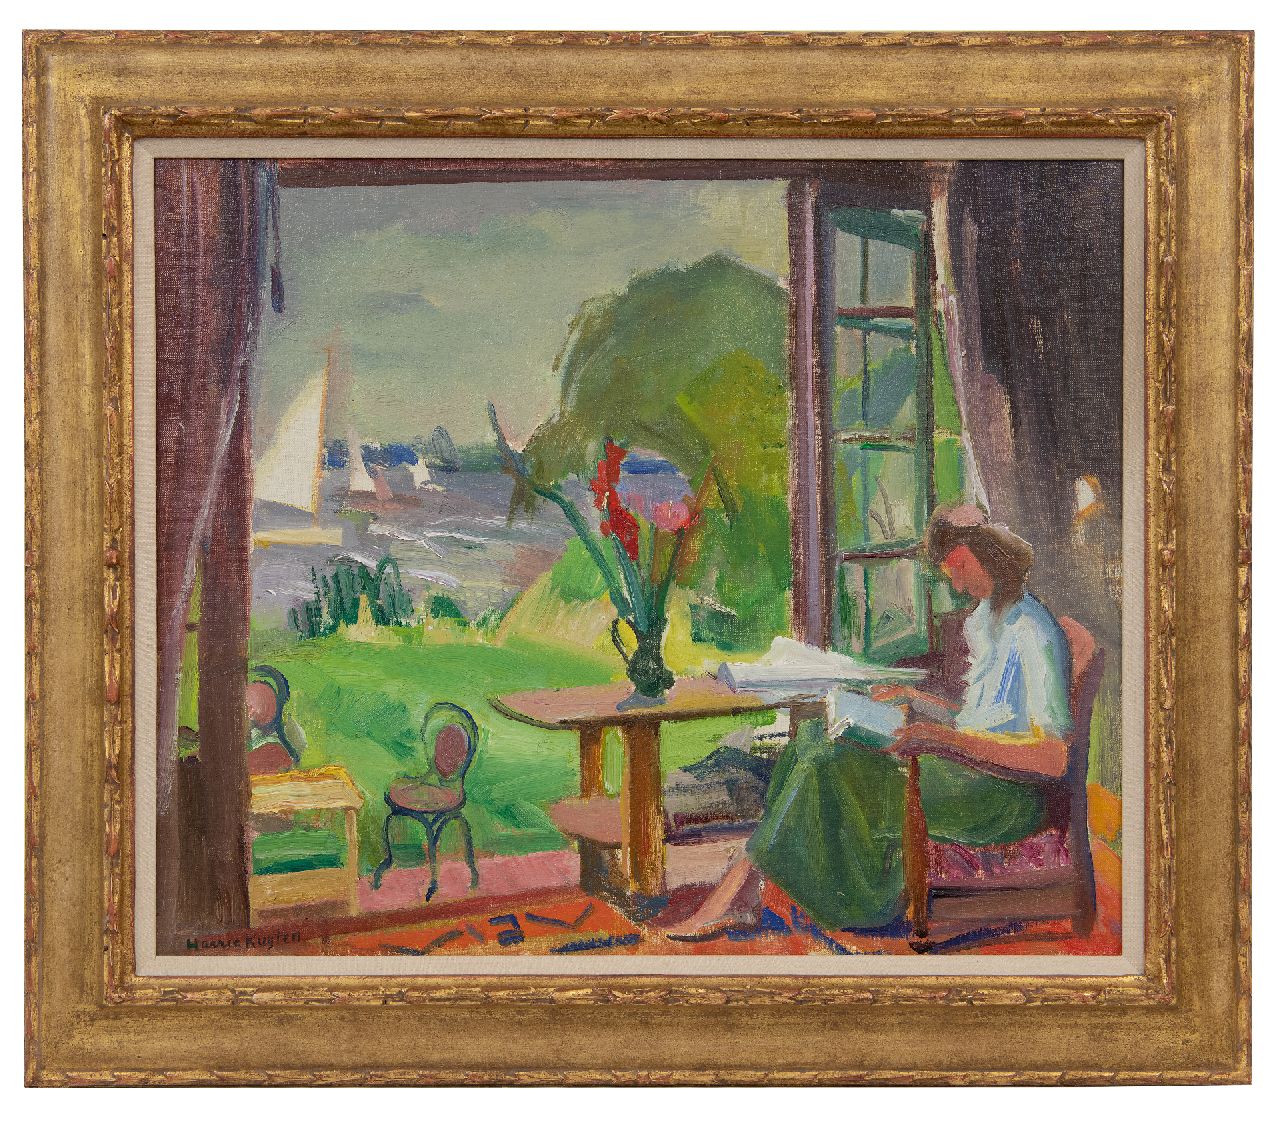 Kuijten H.J.  | Henricus Johannes 'Harrie' Kuijten | Paintings offered for sale | House on the lake, oil on canvas 50.0 x 60.0 cm, signed l.l. and painted ca. 1948